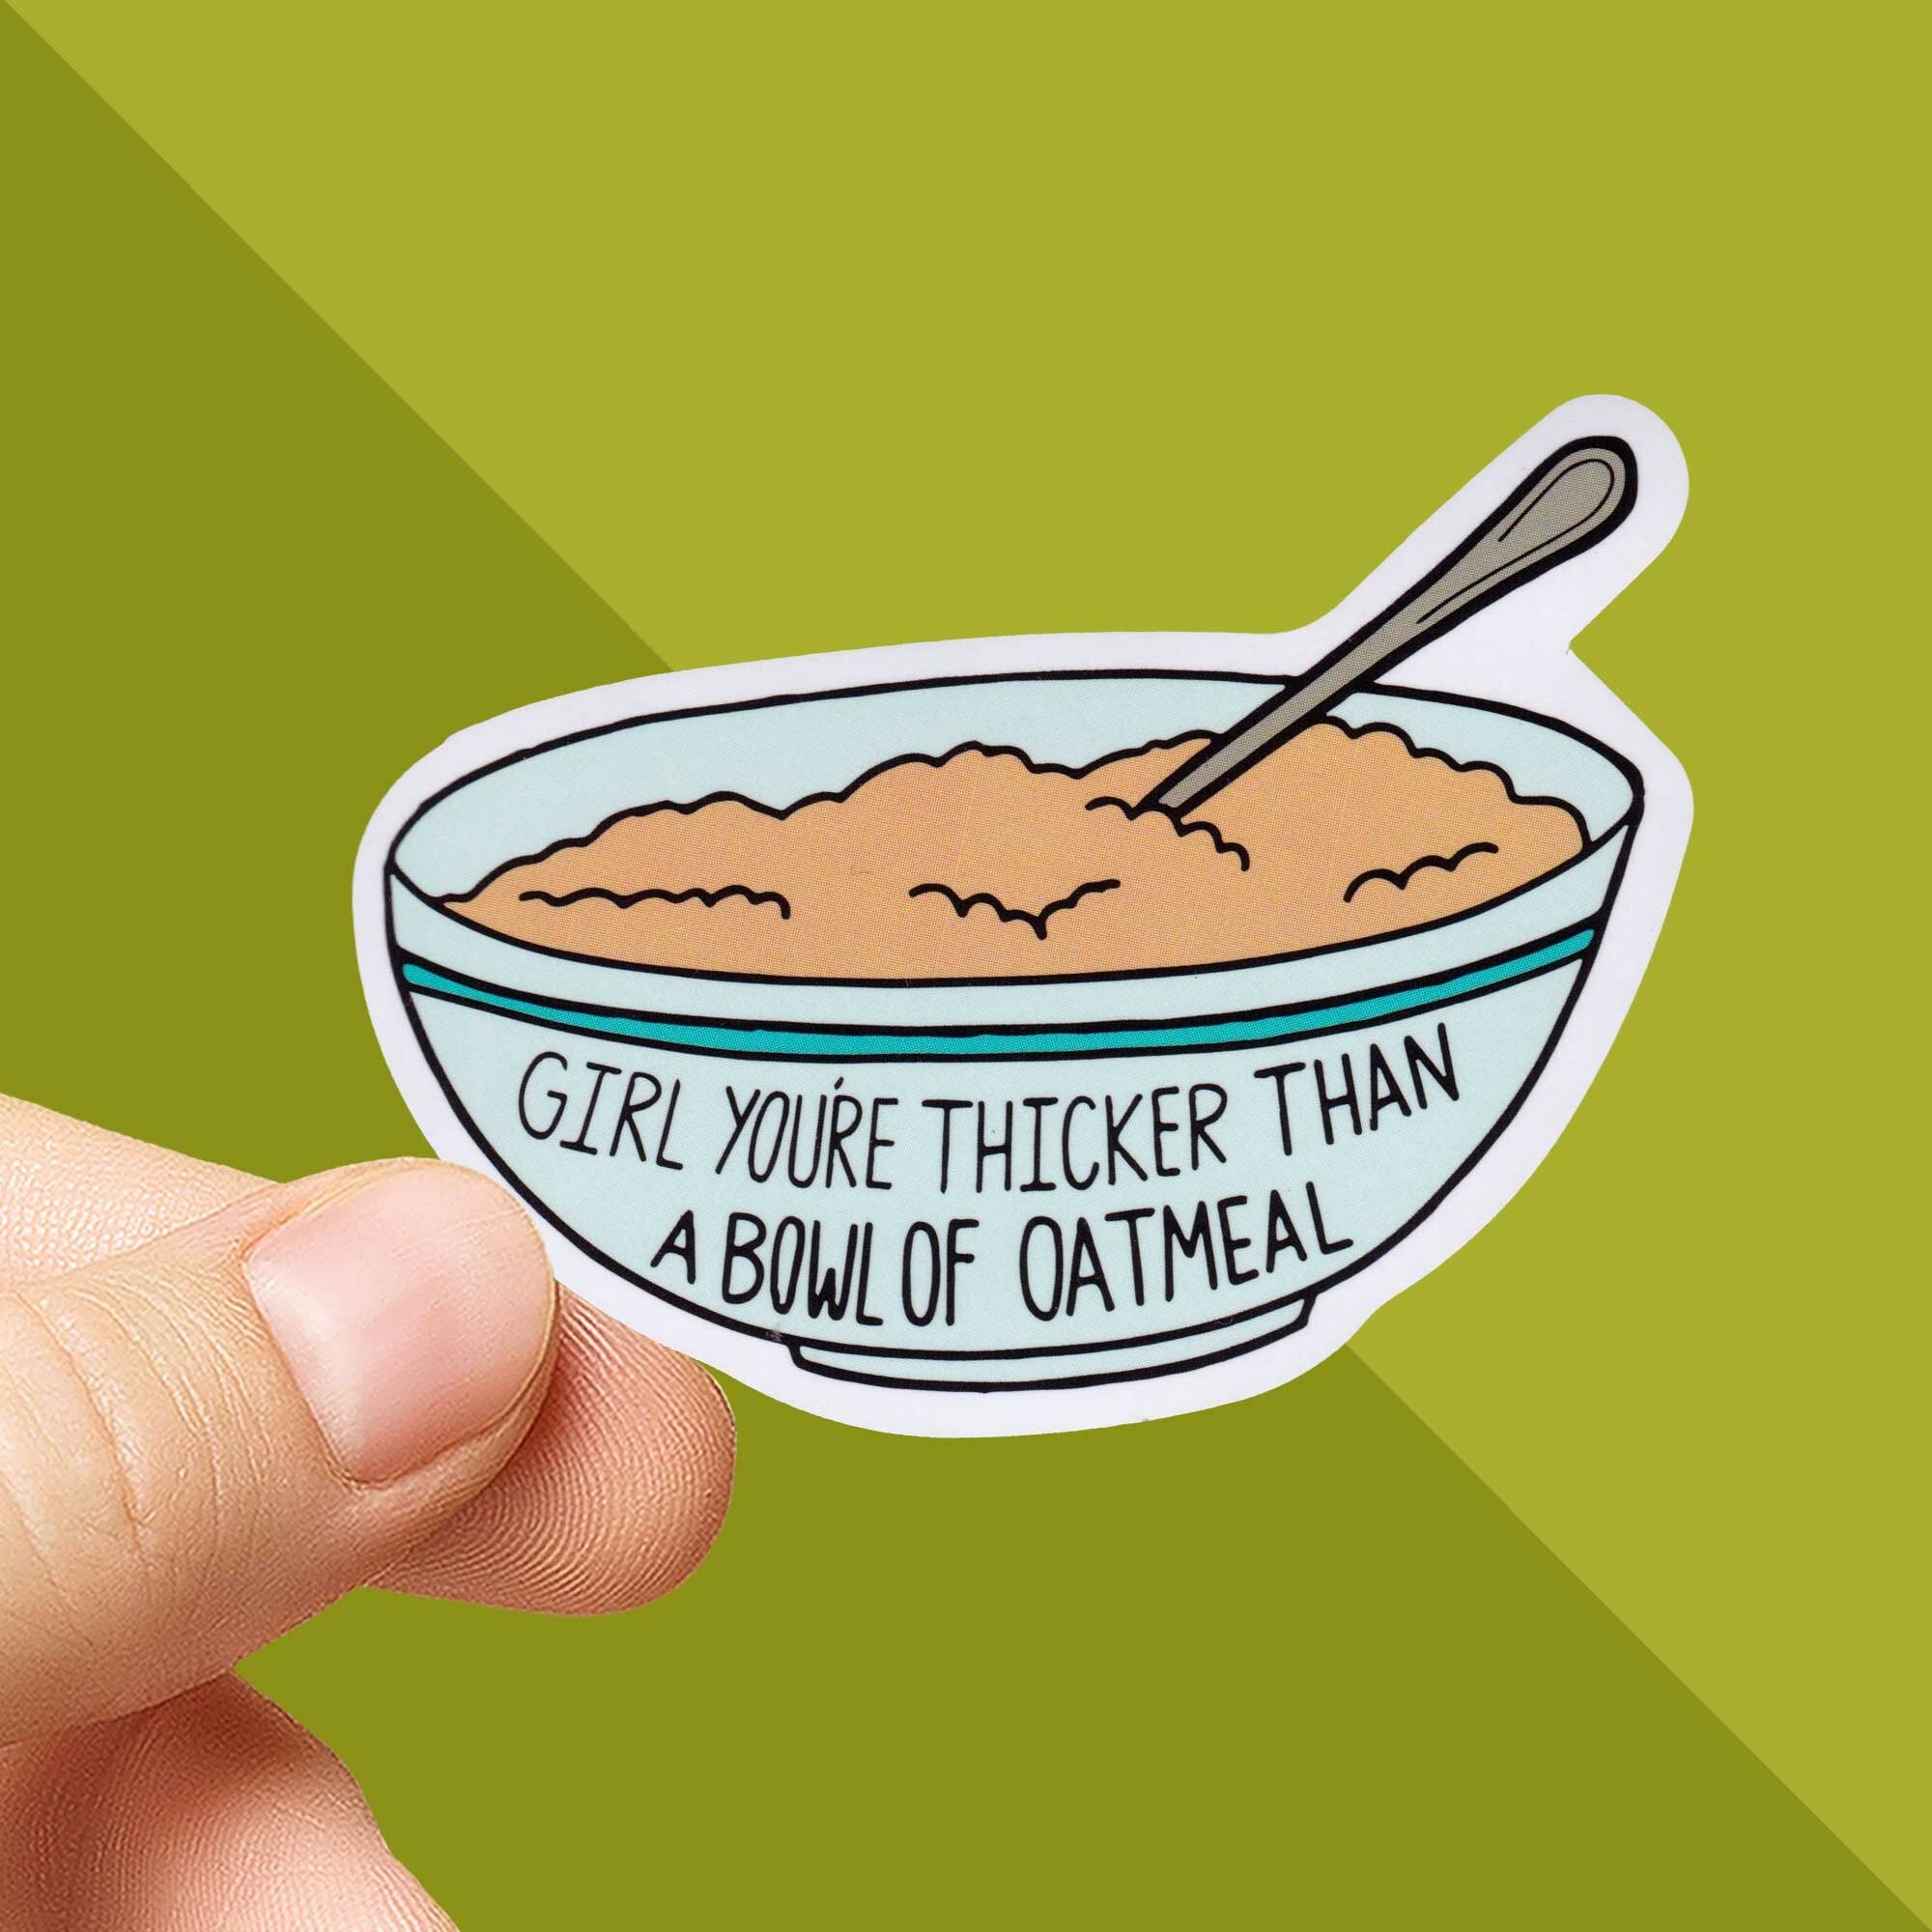 calvin barbour recommends girl you thicker than a bowl of oatmeal gif pic